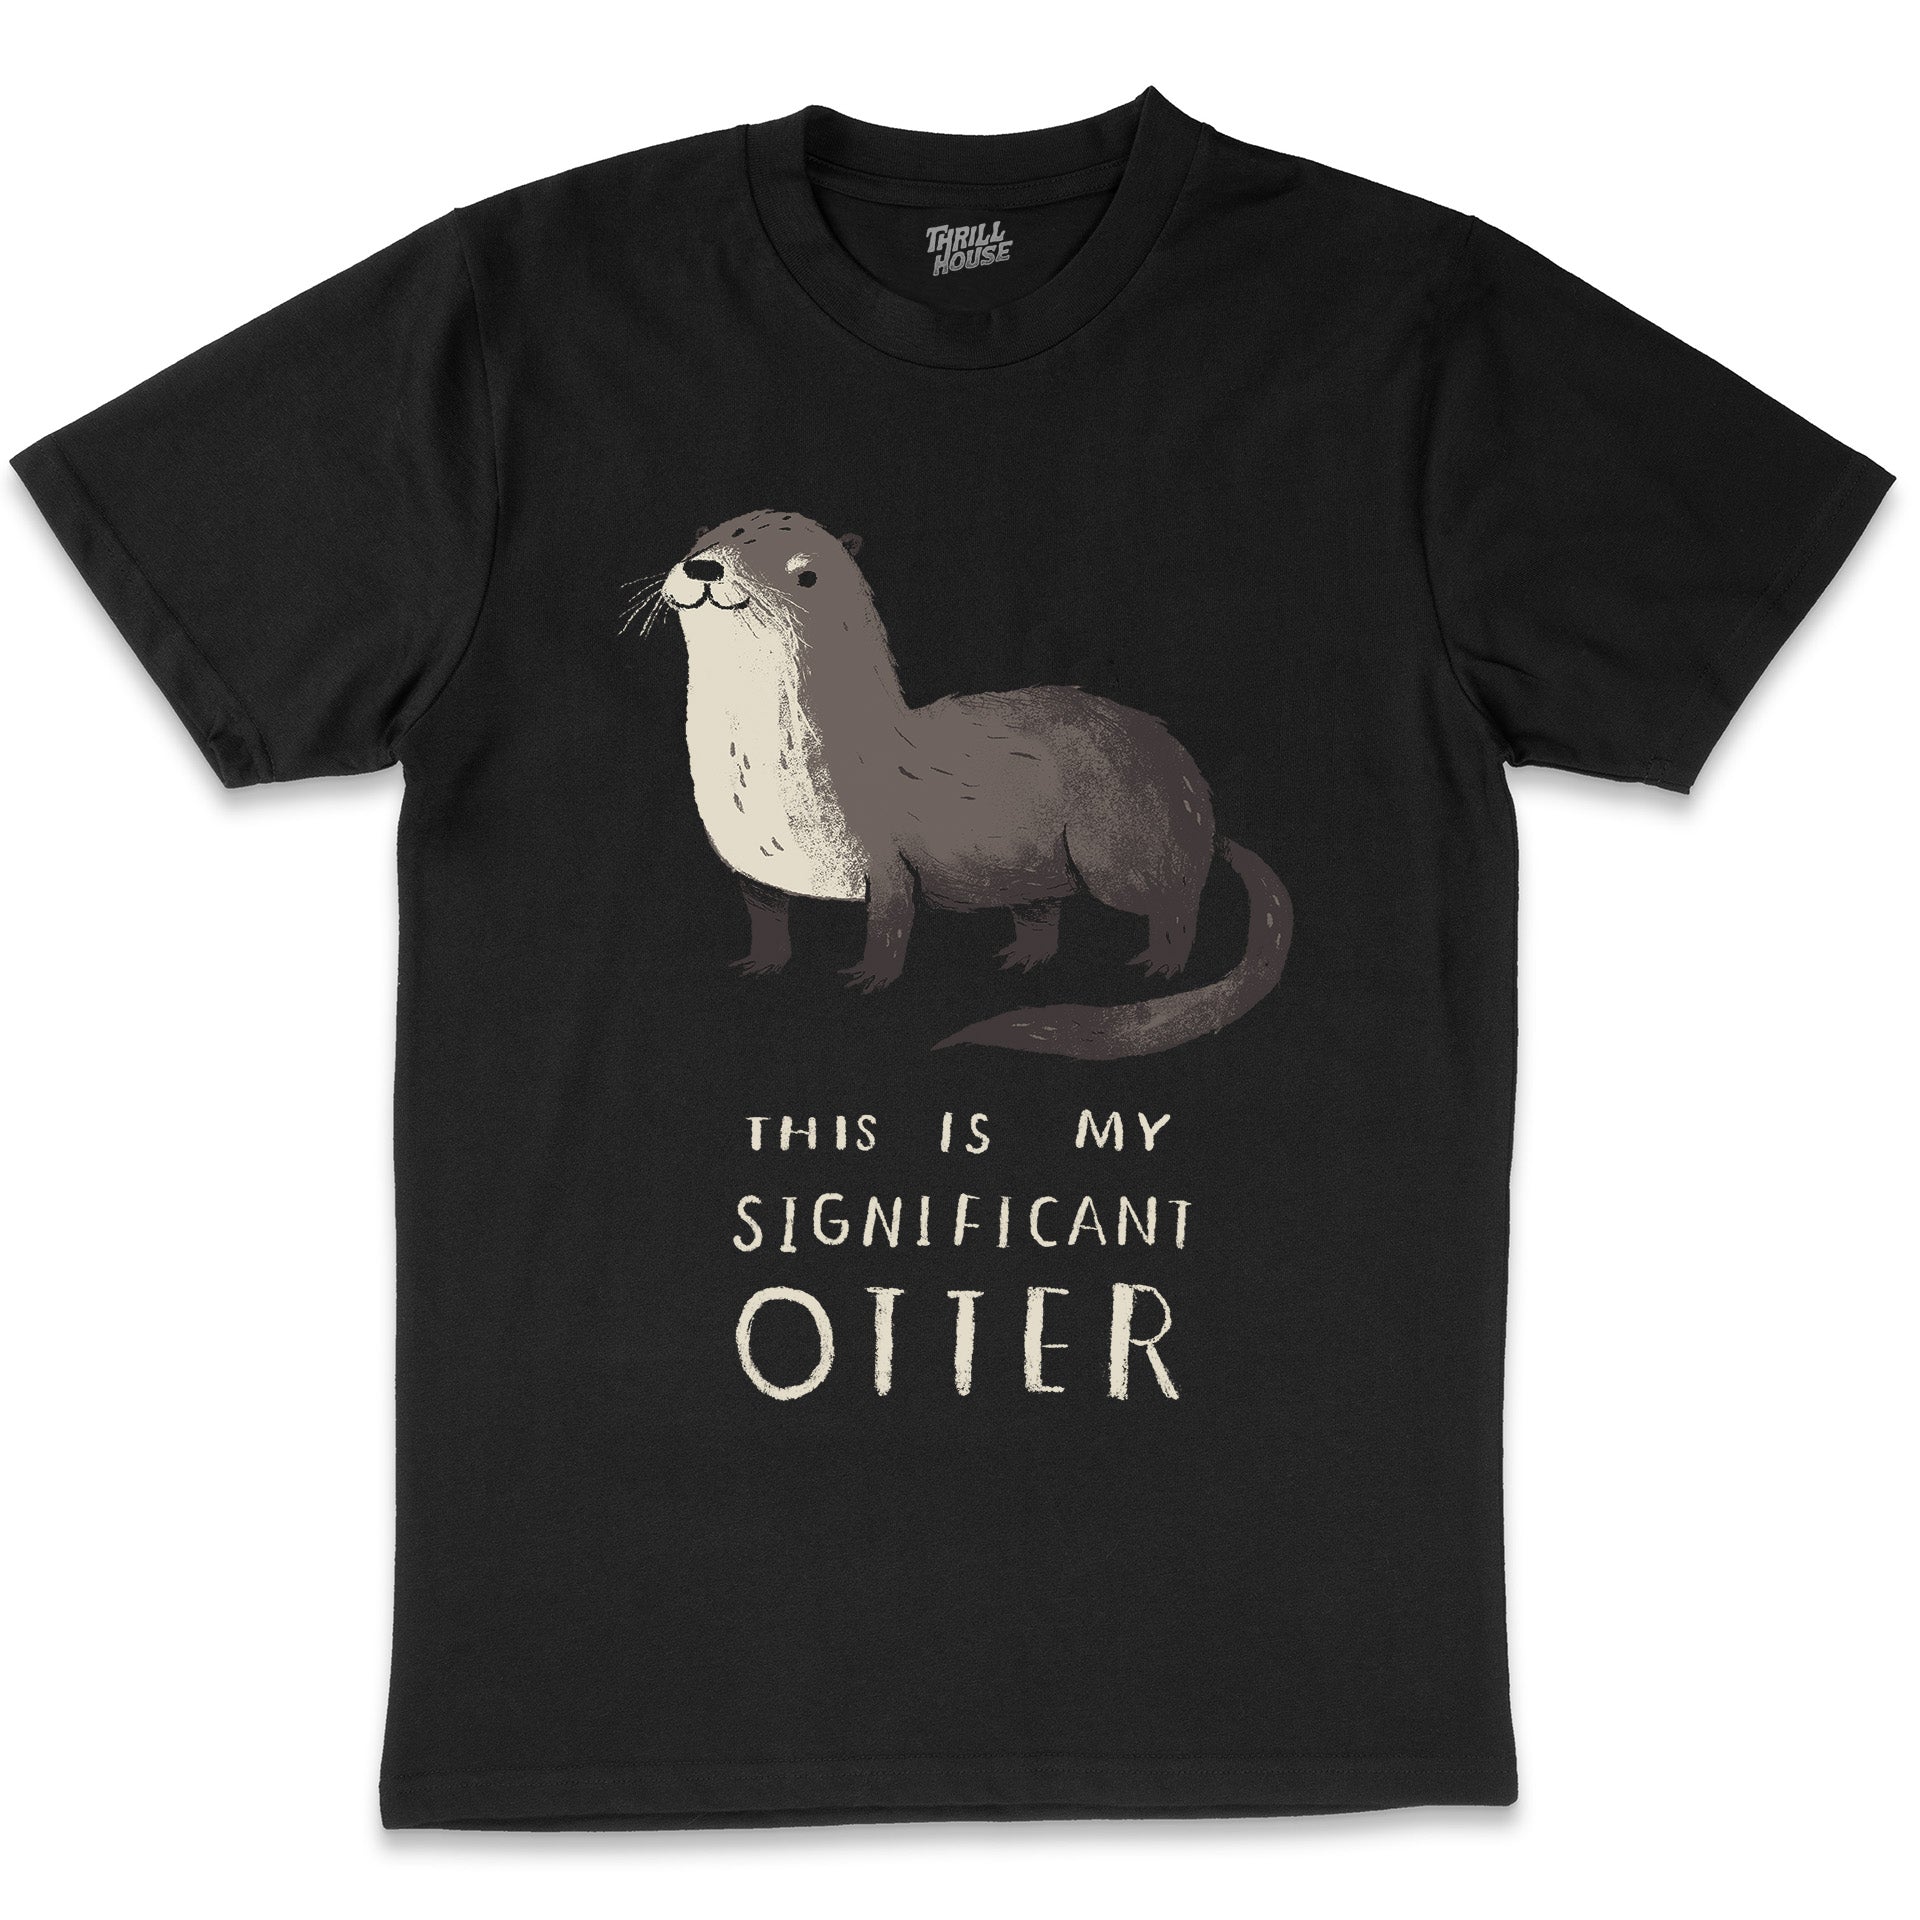 Significant Otter Funny Pun Slogan Sea Animal Funny Cute Artsy Drawing Cotton T-Shirt